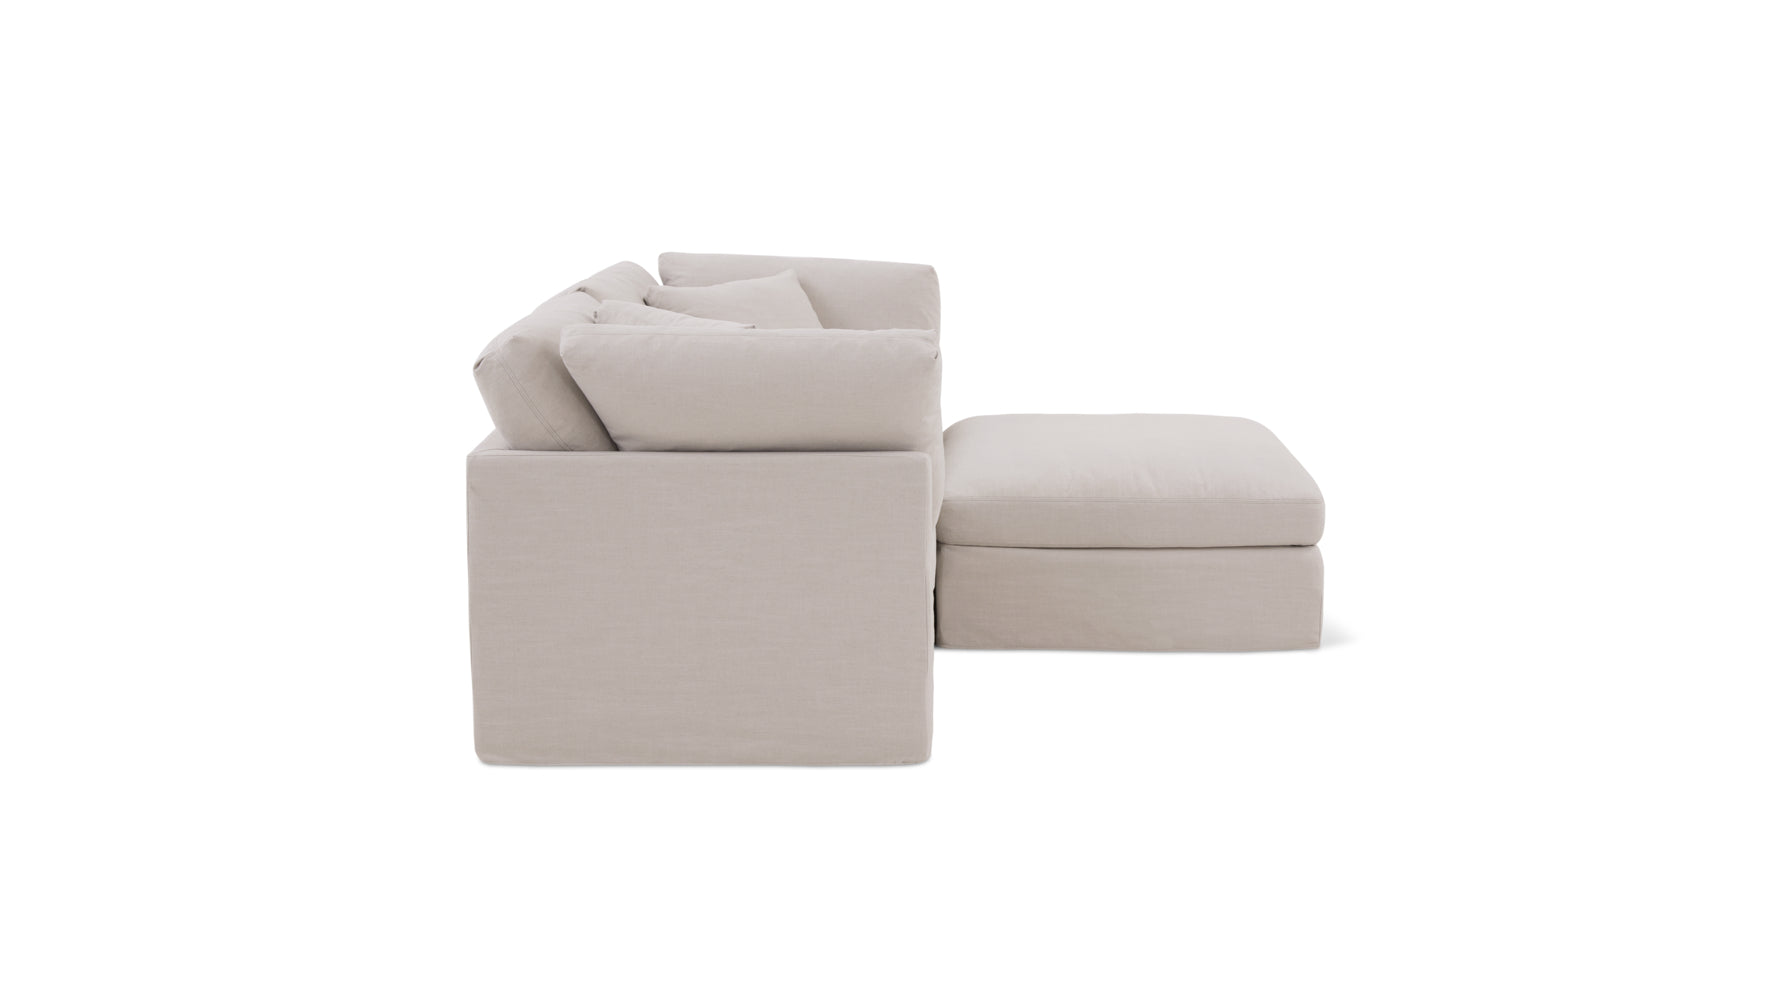 Get Together™ 3-Piece Modular Sectional, Standard, Clay - Image 3